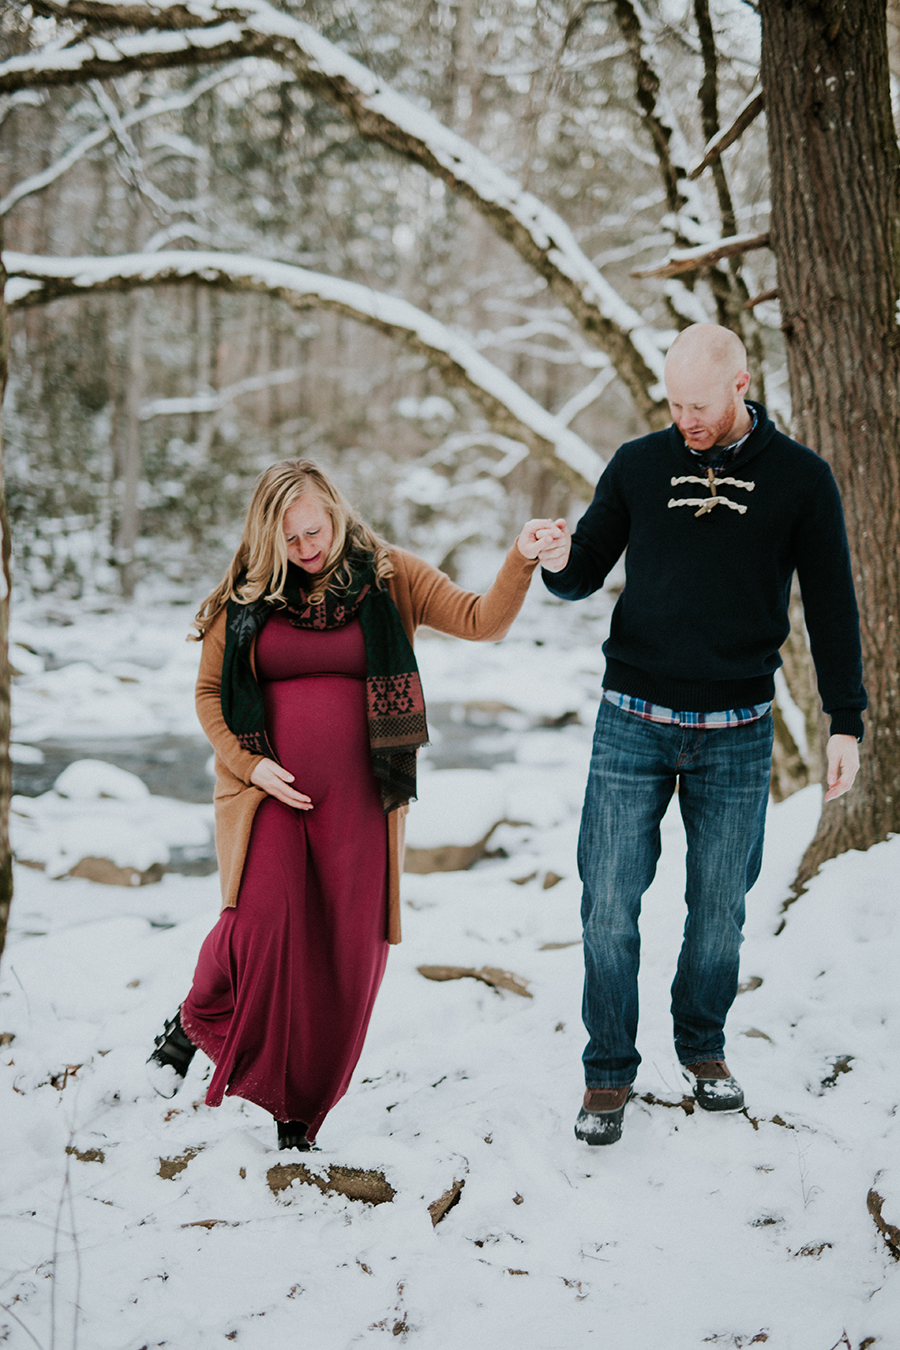  Knoxville, TN Smoky Mountain maternity photos, walking together.